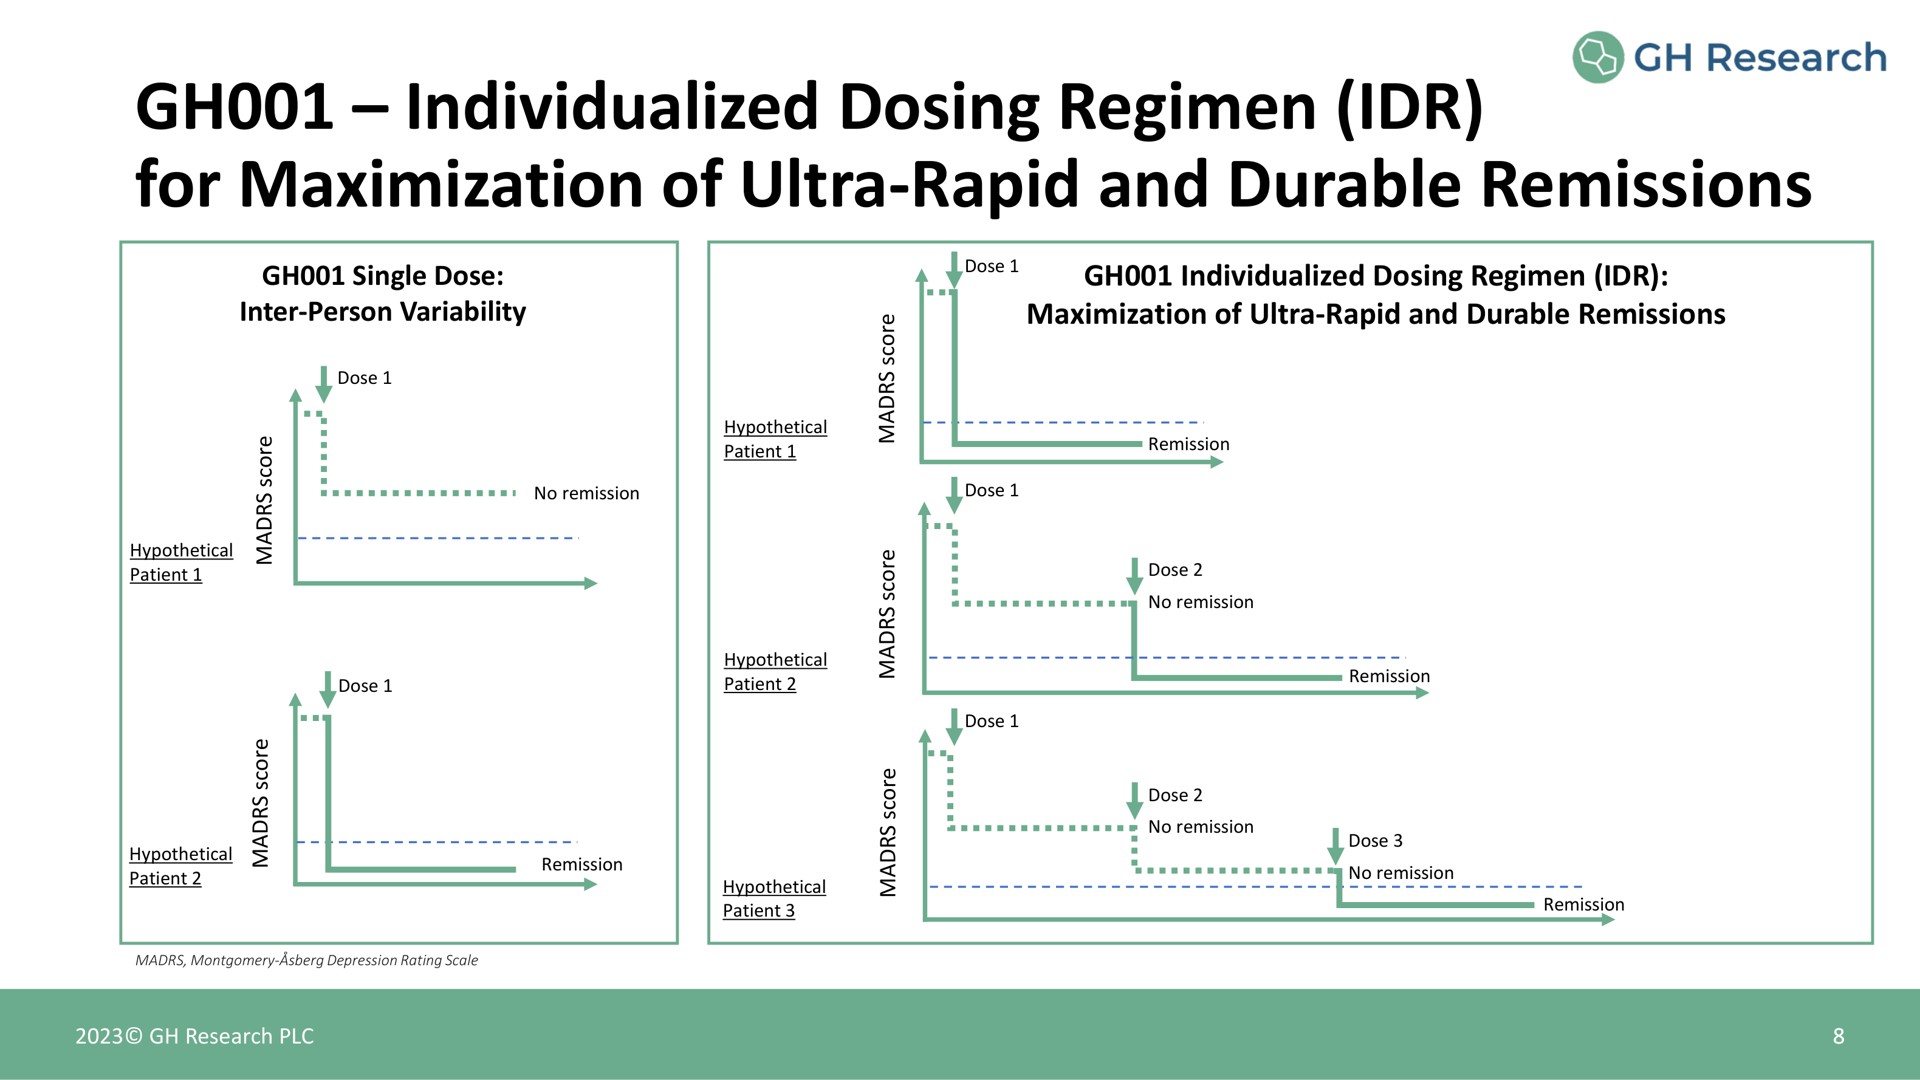 individualized dosing regimen for maximization of ultra rapid and durable remissions | GH Research